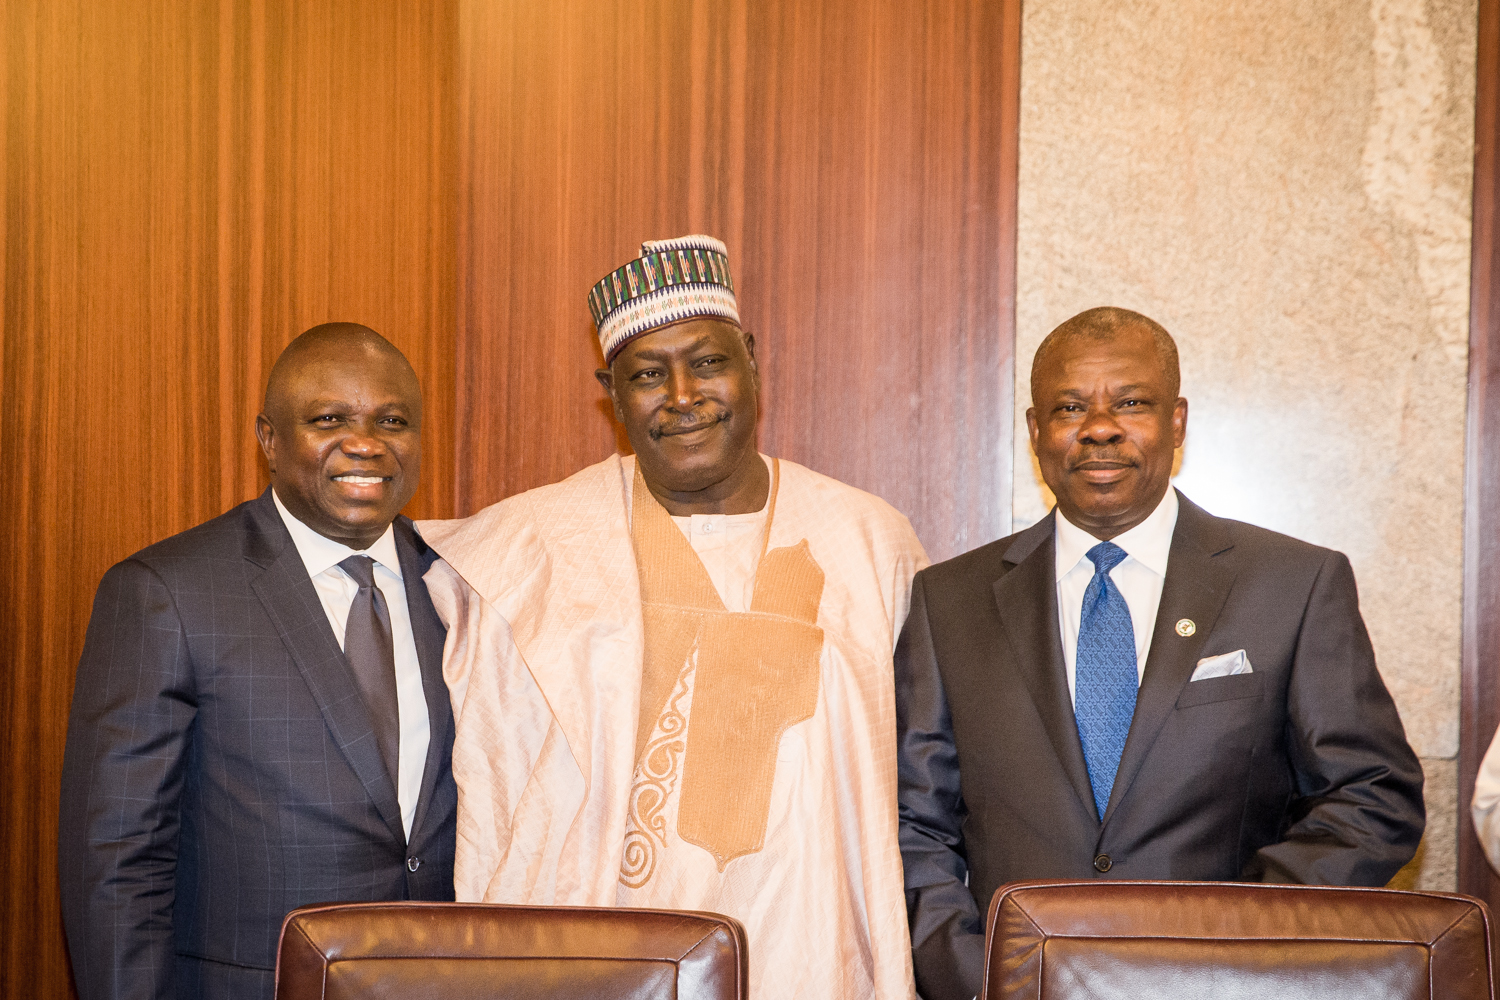 Lagos State Governor, Mr. Akinwunmi Ambode (left), the newly sworn-in Secretary to the Government of the Federation, Babachir David Lawal (middle) and Ogun State Governor, Senator Ibikunle Amosun (right) during the ICAN courtesy visit to the President at the Aso Villa, Abuja on Tuesday, September 01, 2015.